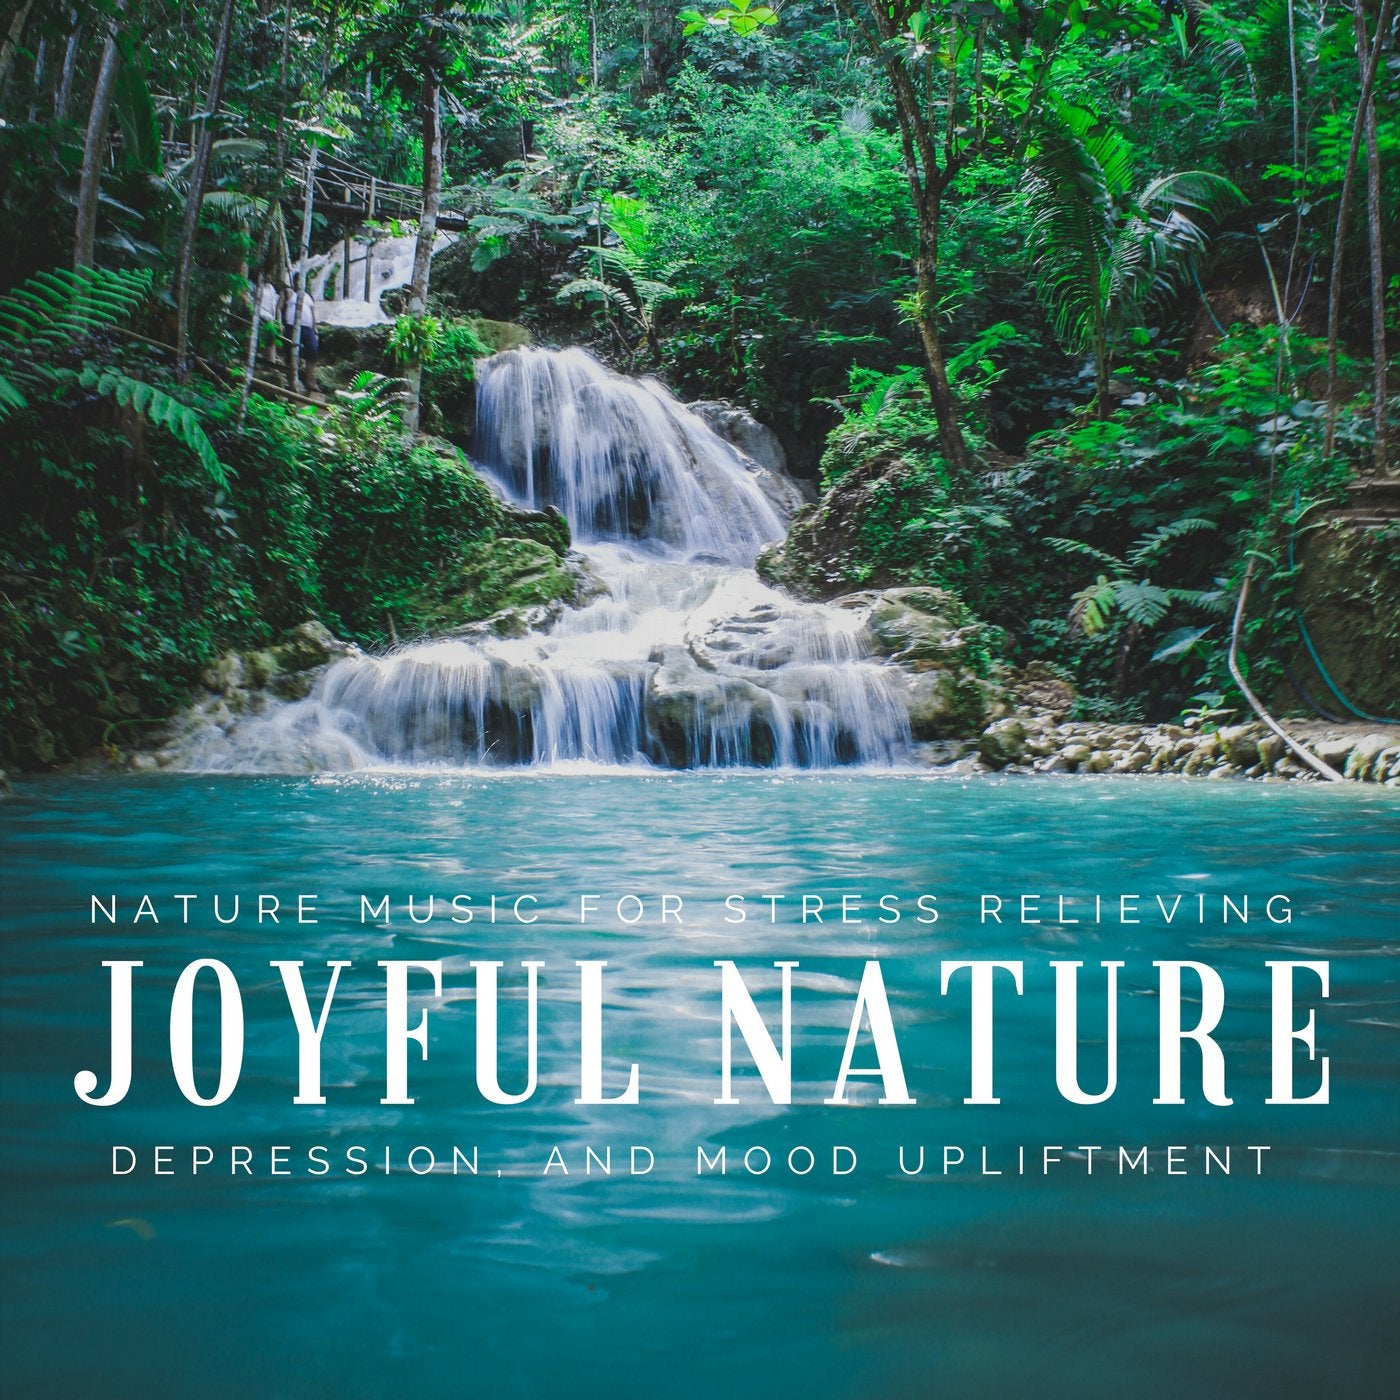 Joyful Nature - Nature Music For Stress Relieving, Depression And Mood Upliftment